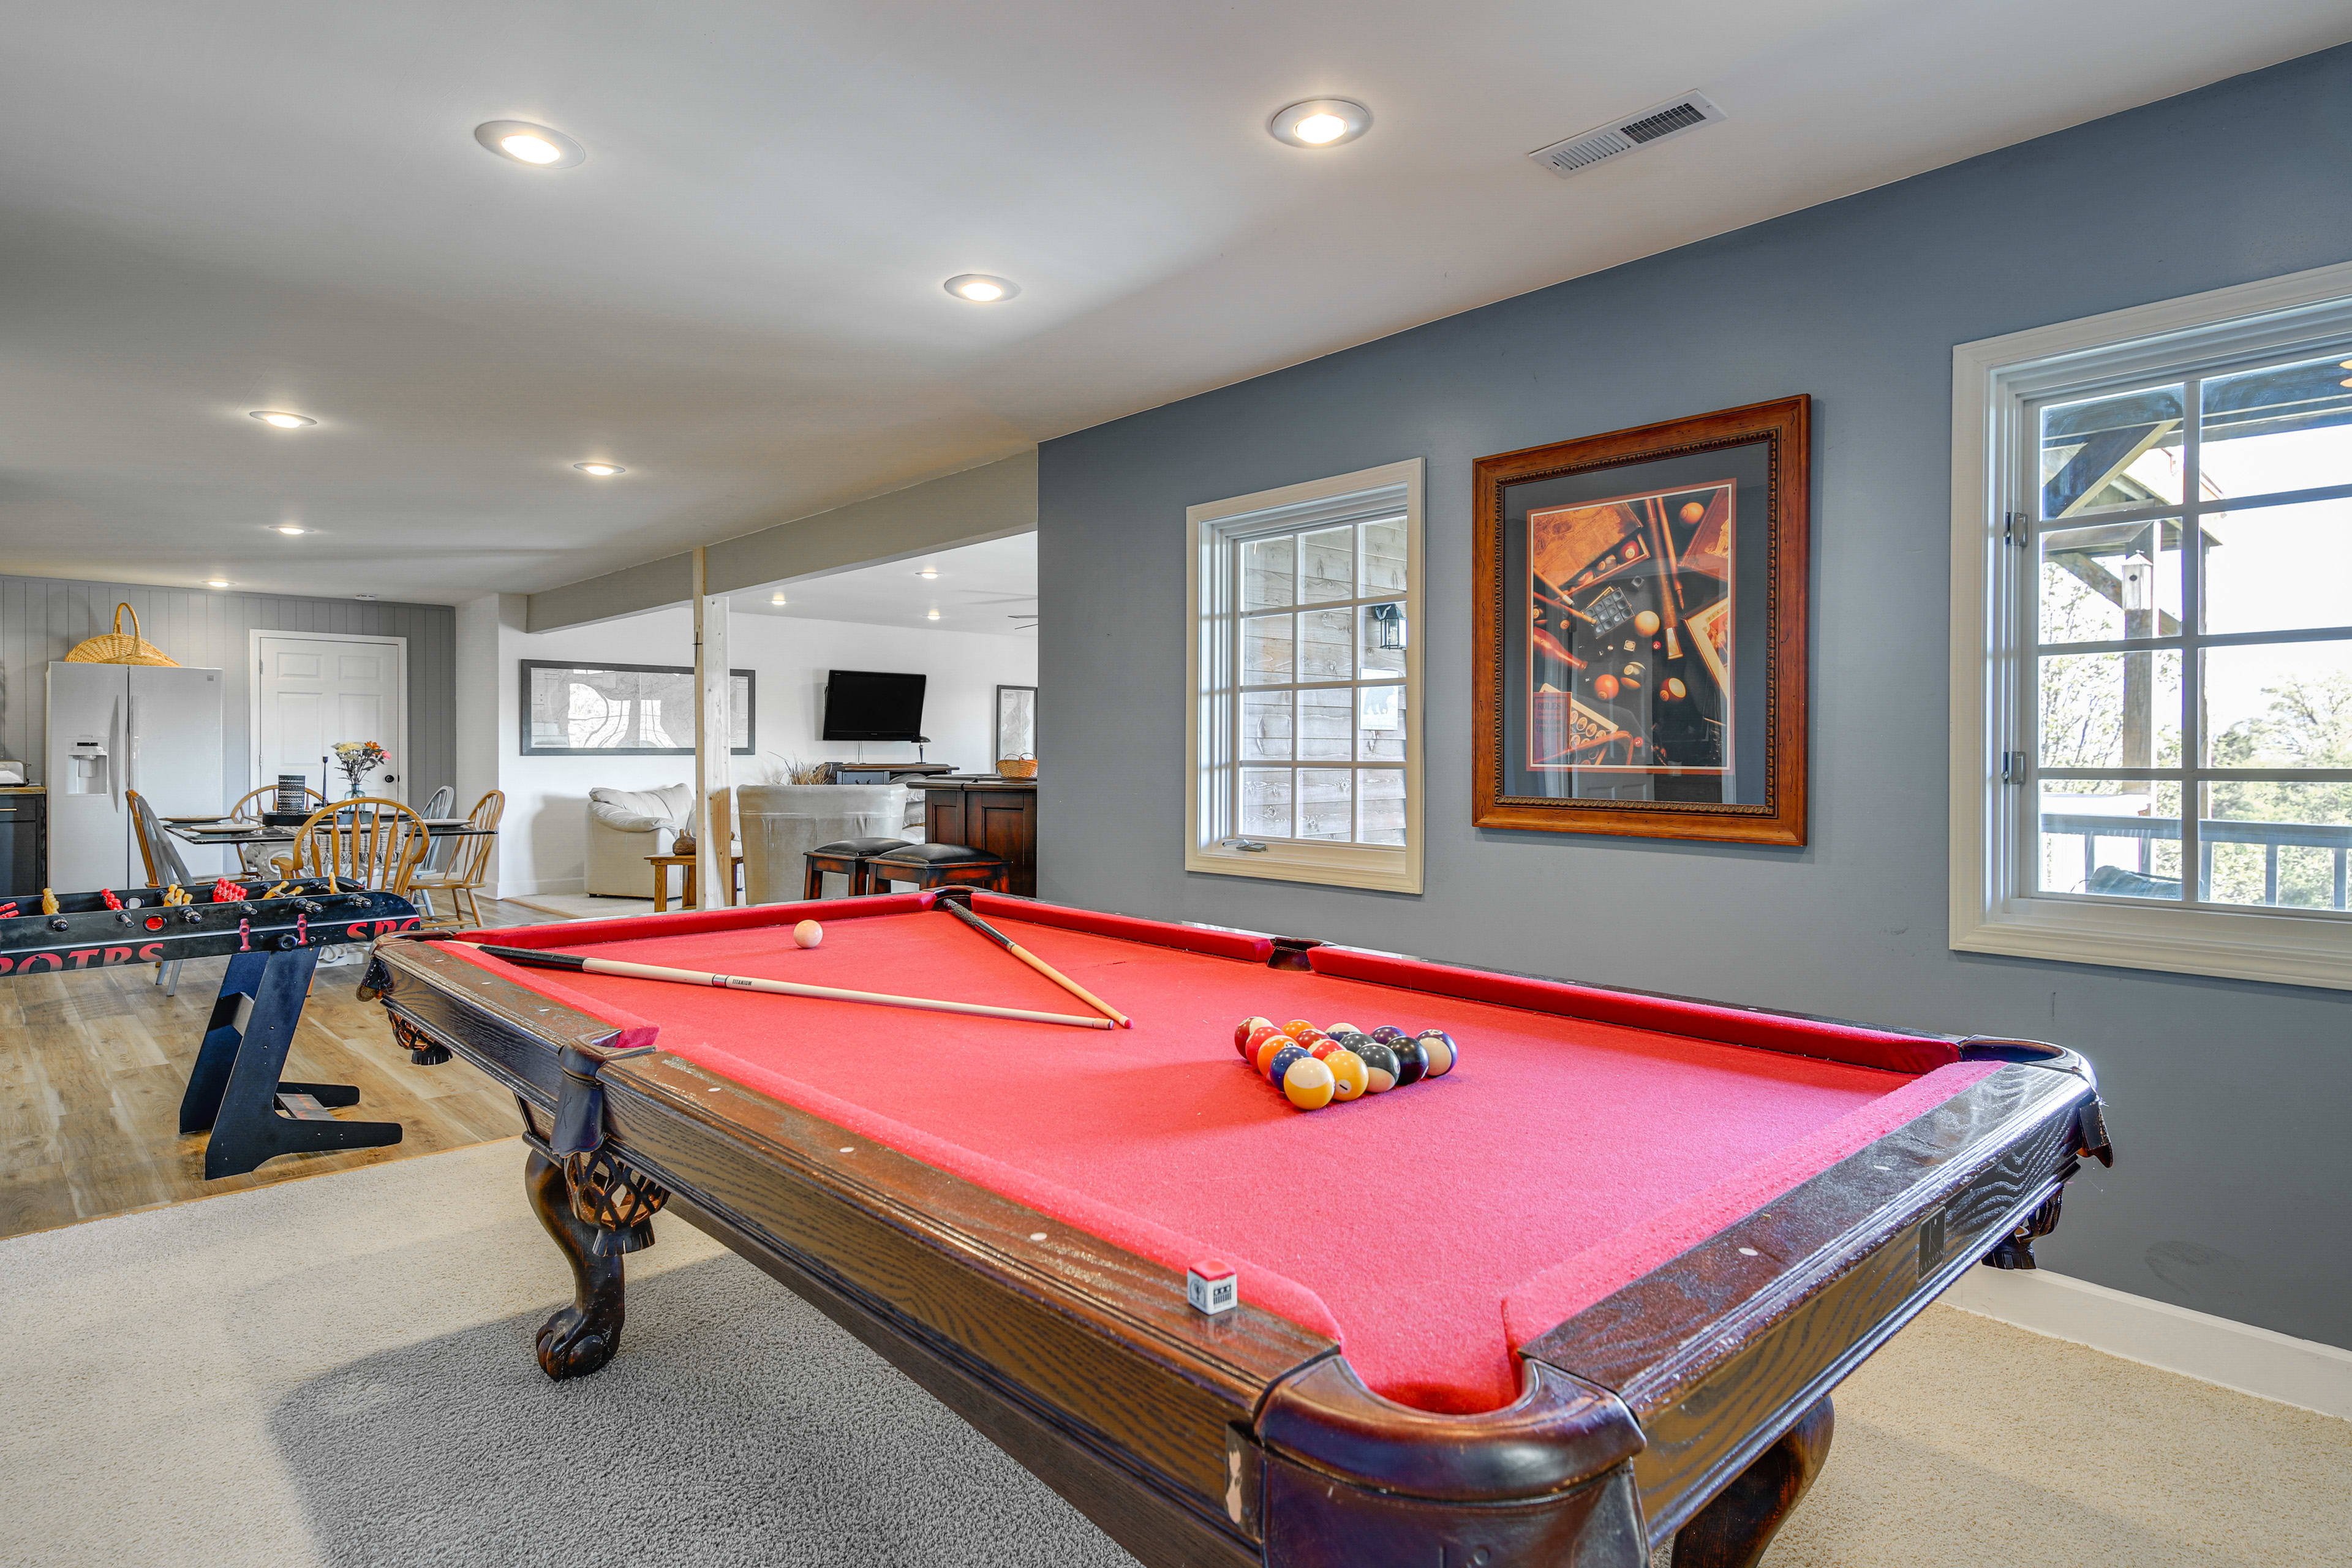 Game Room | Foosball & Pool Table | Central A/C & Heating